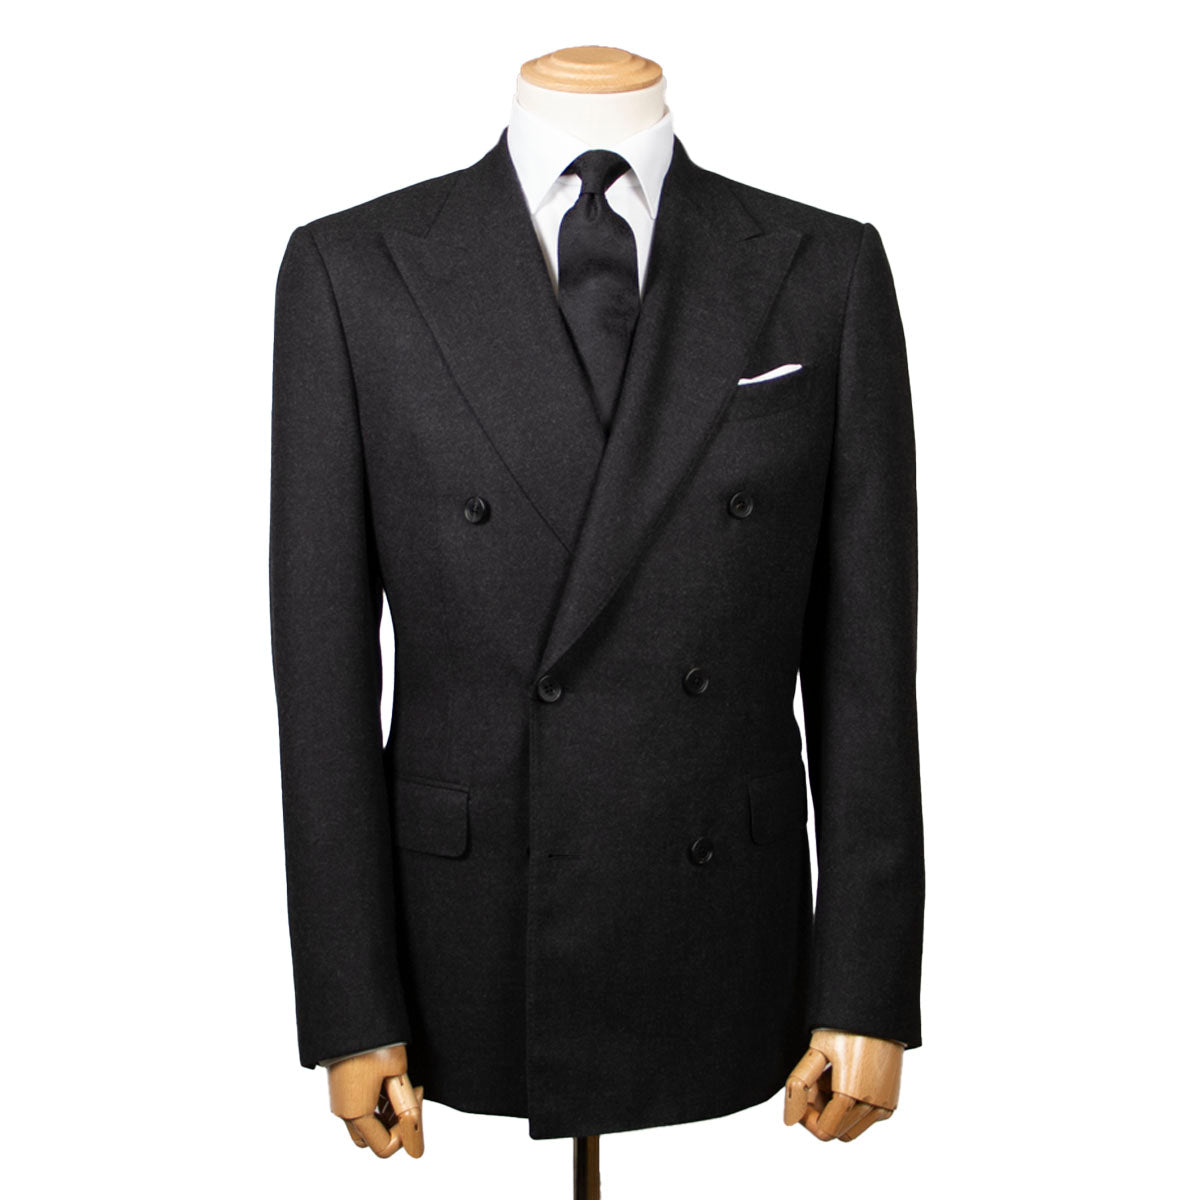 Charcoal Wool Flannel Double-Breasted Suit  Robert Old   